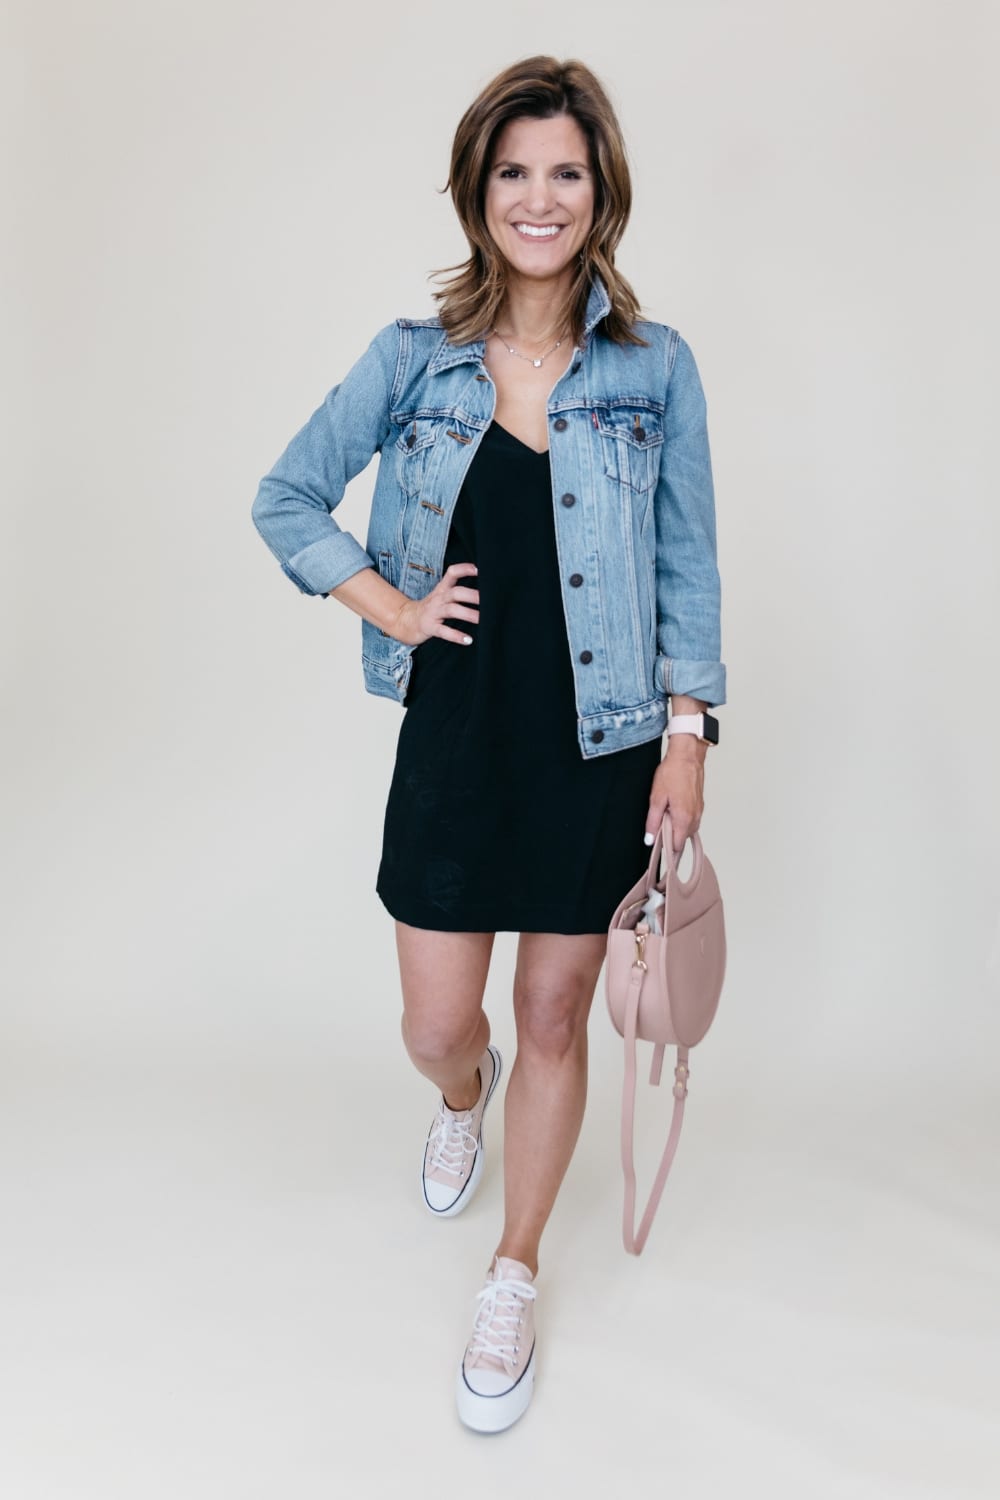 black dress with denim jacket and sneakers